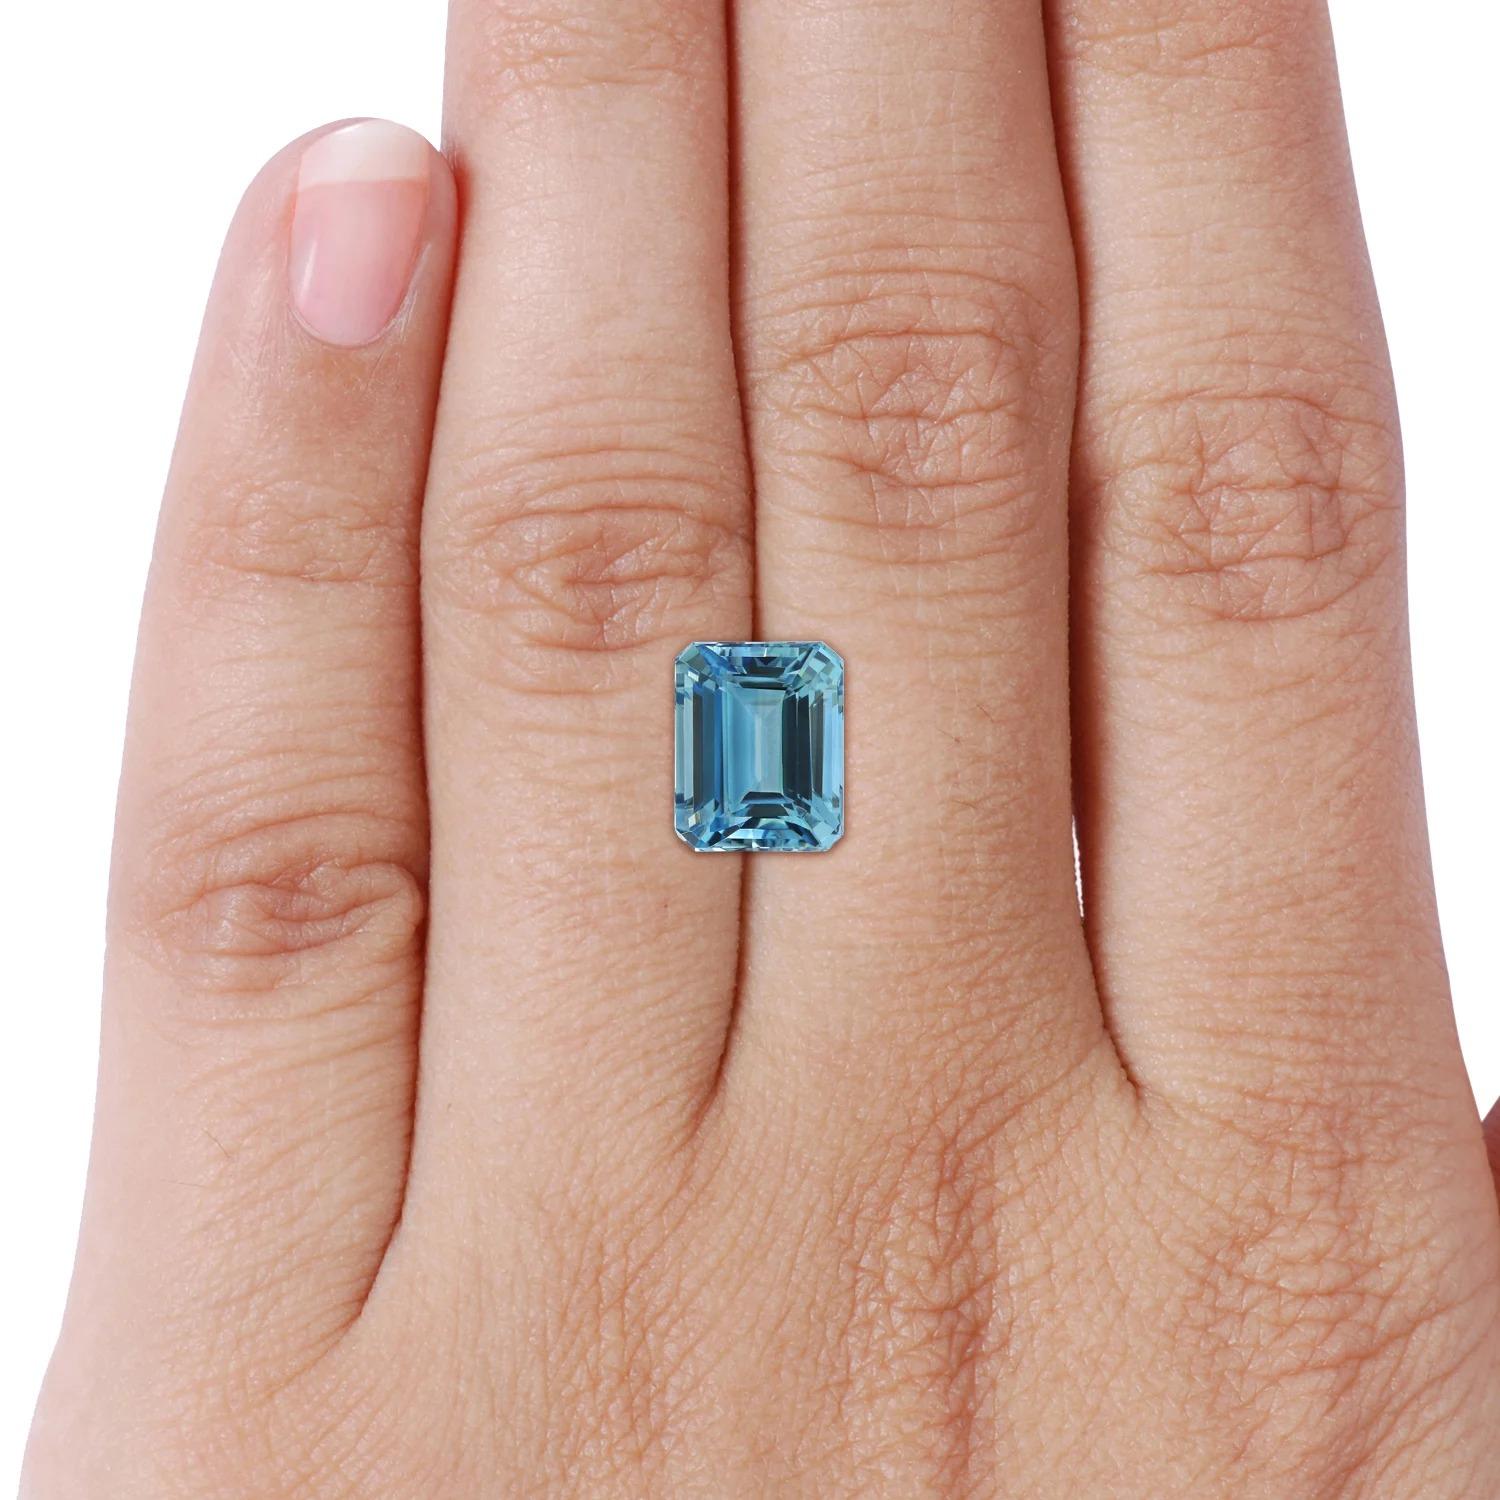 For Sale:  ANGARA GIA Certified Solitaire Emerald-Cut Aquamarine Ring in Yellow Gold 7